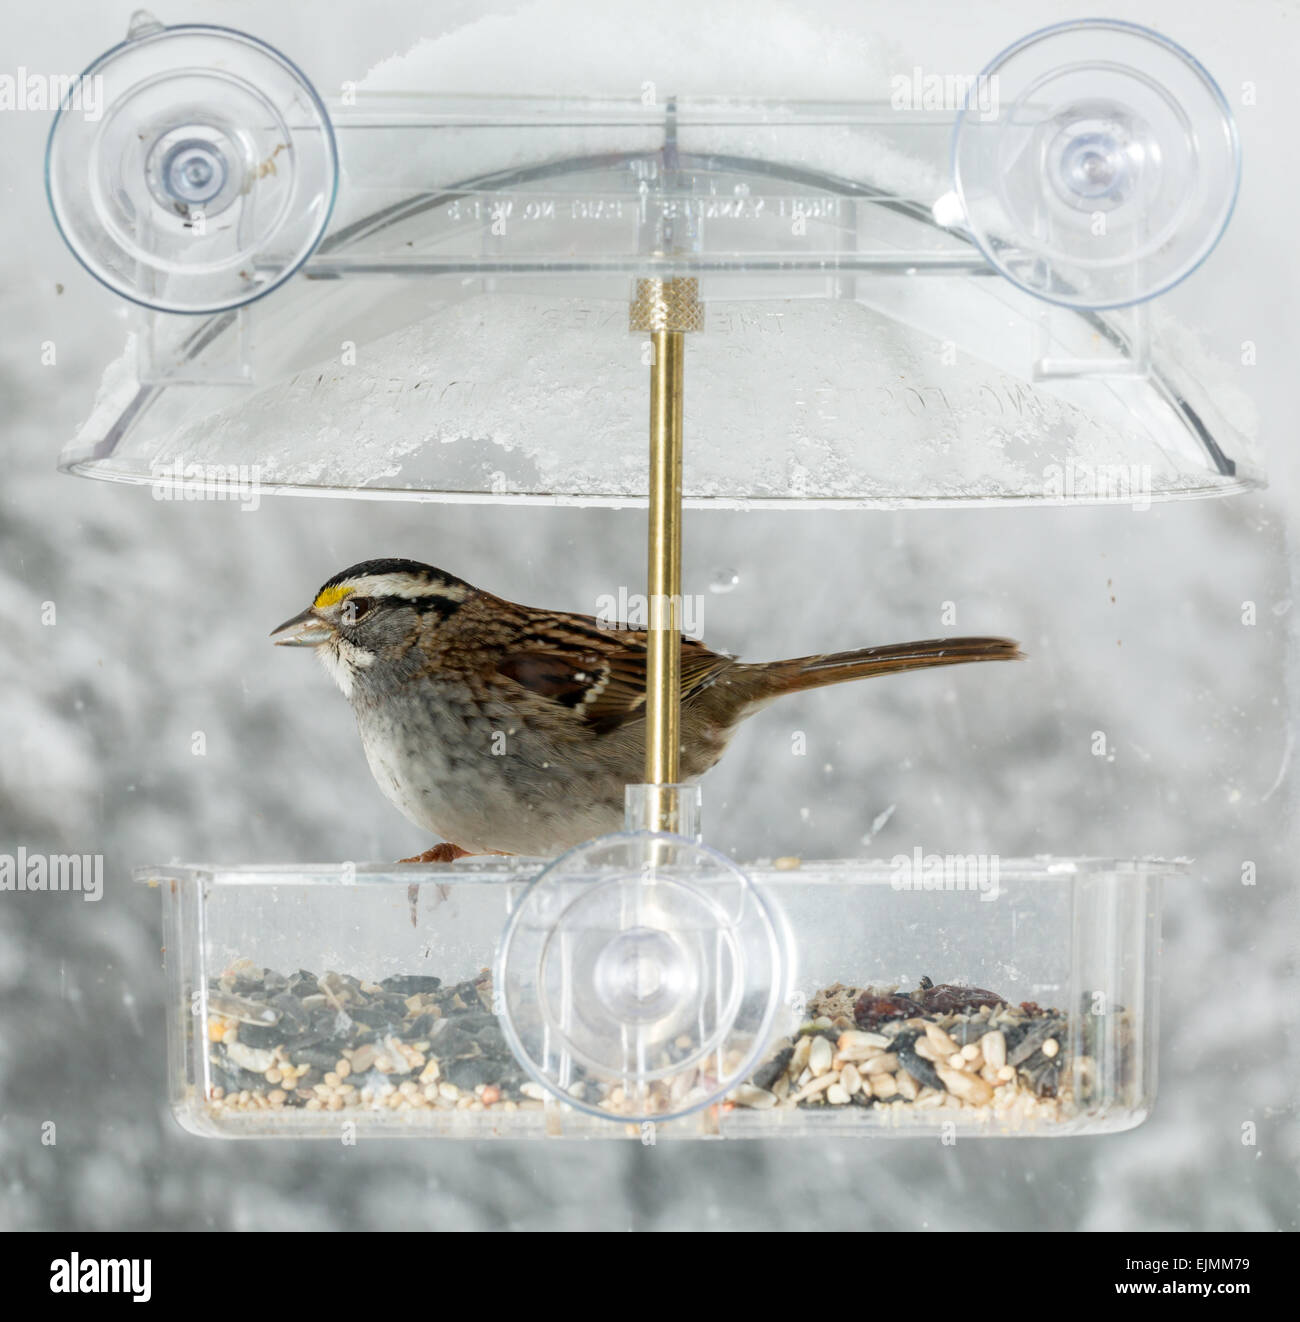 American Sparrow bird in window attached birdfeeder on a wet cold day in winter Stock Photo